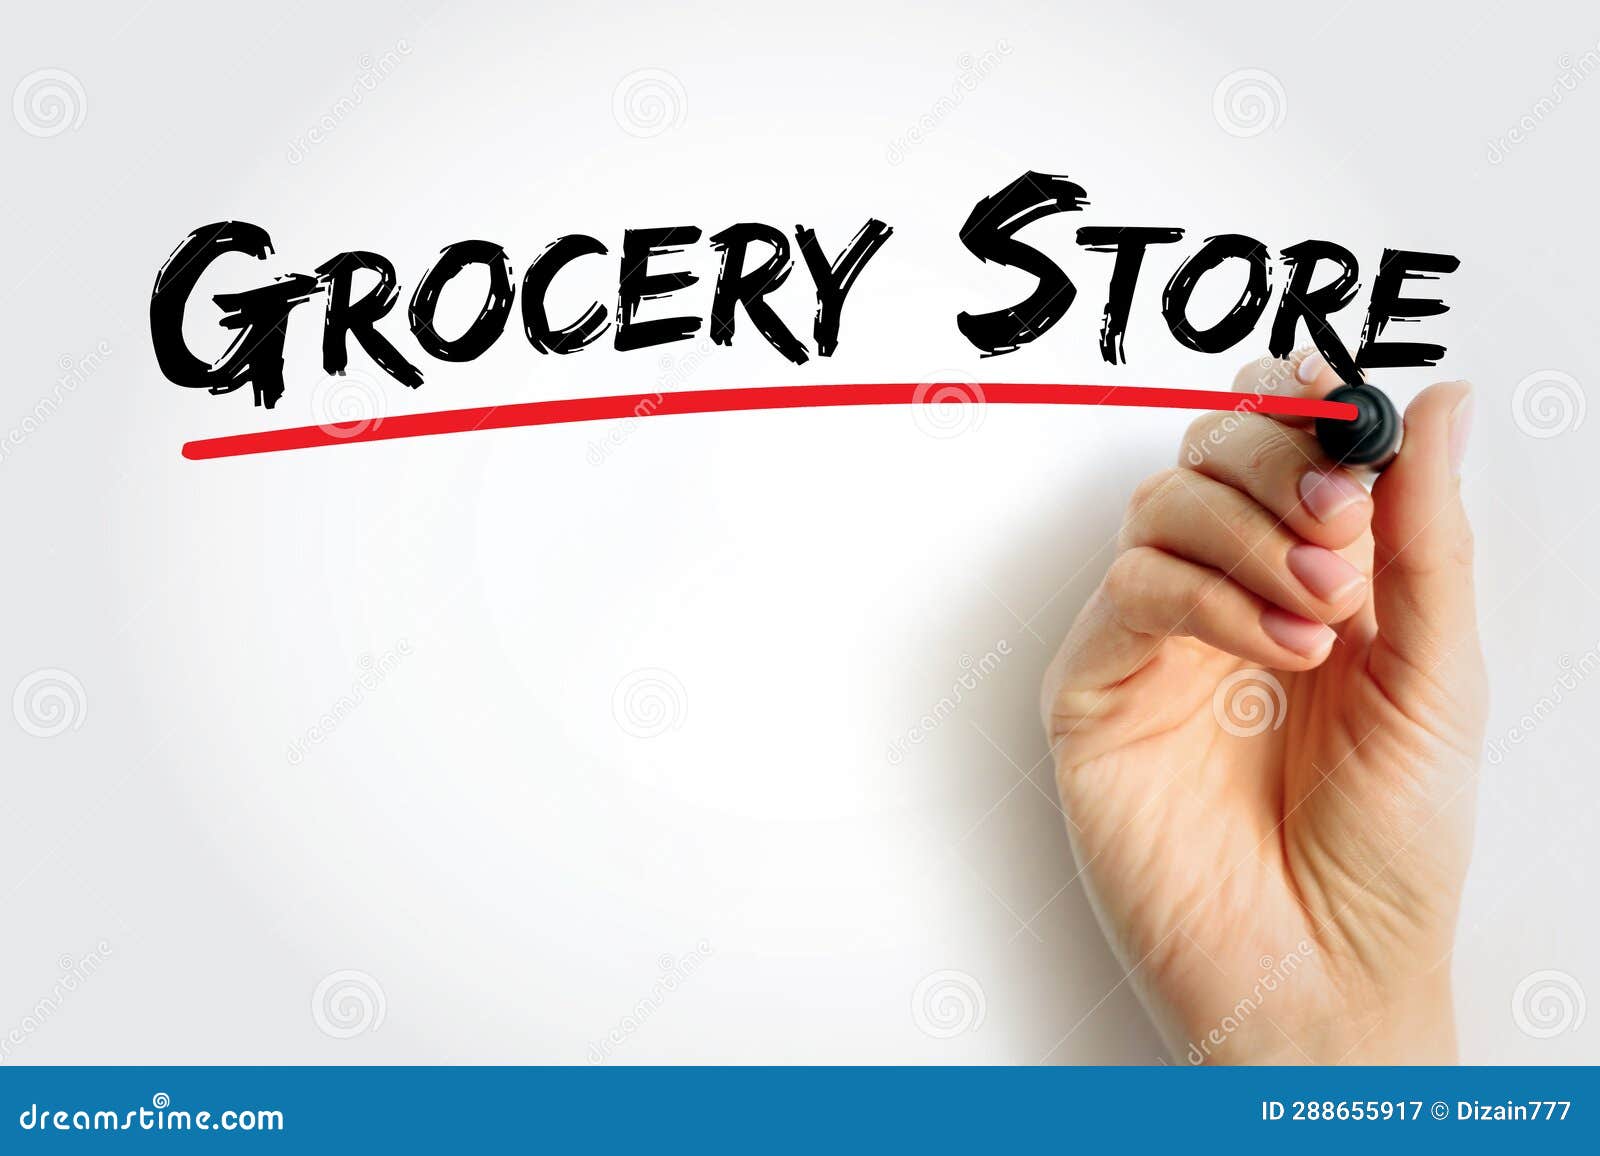 grocery store is a store that primarily retails a general range of food products, text concept background